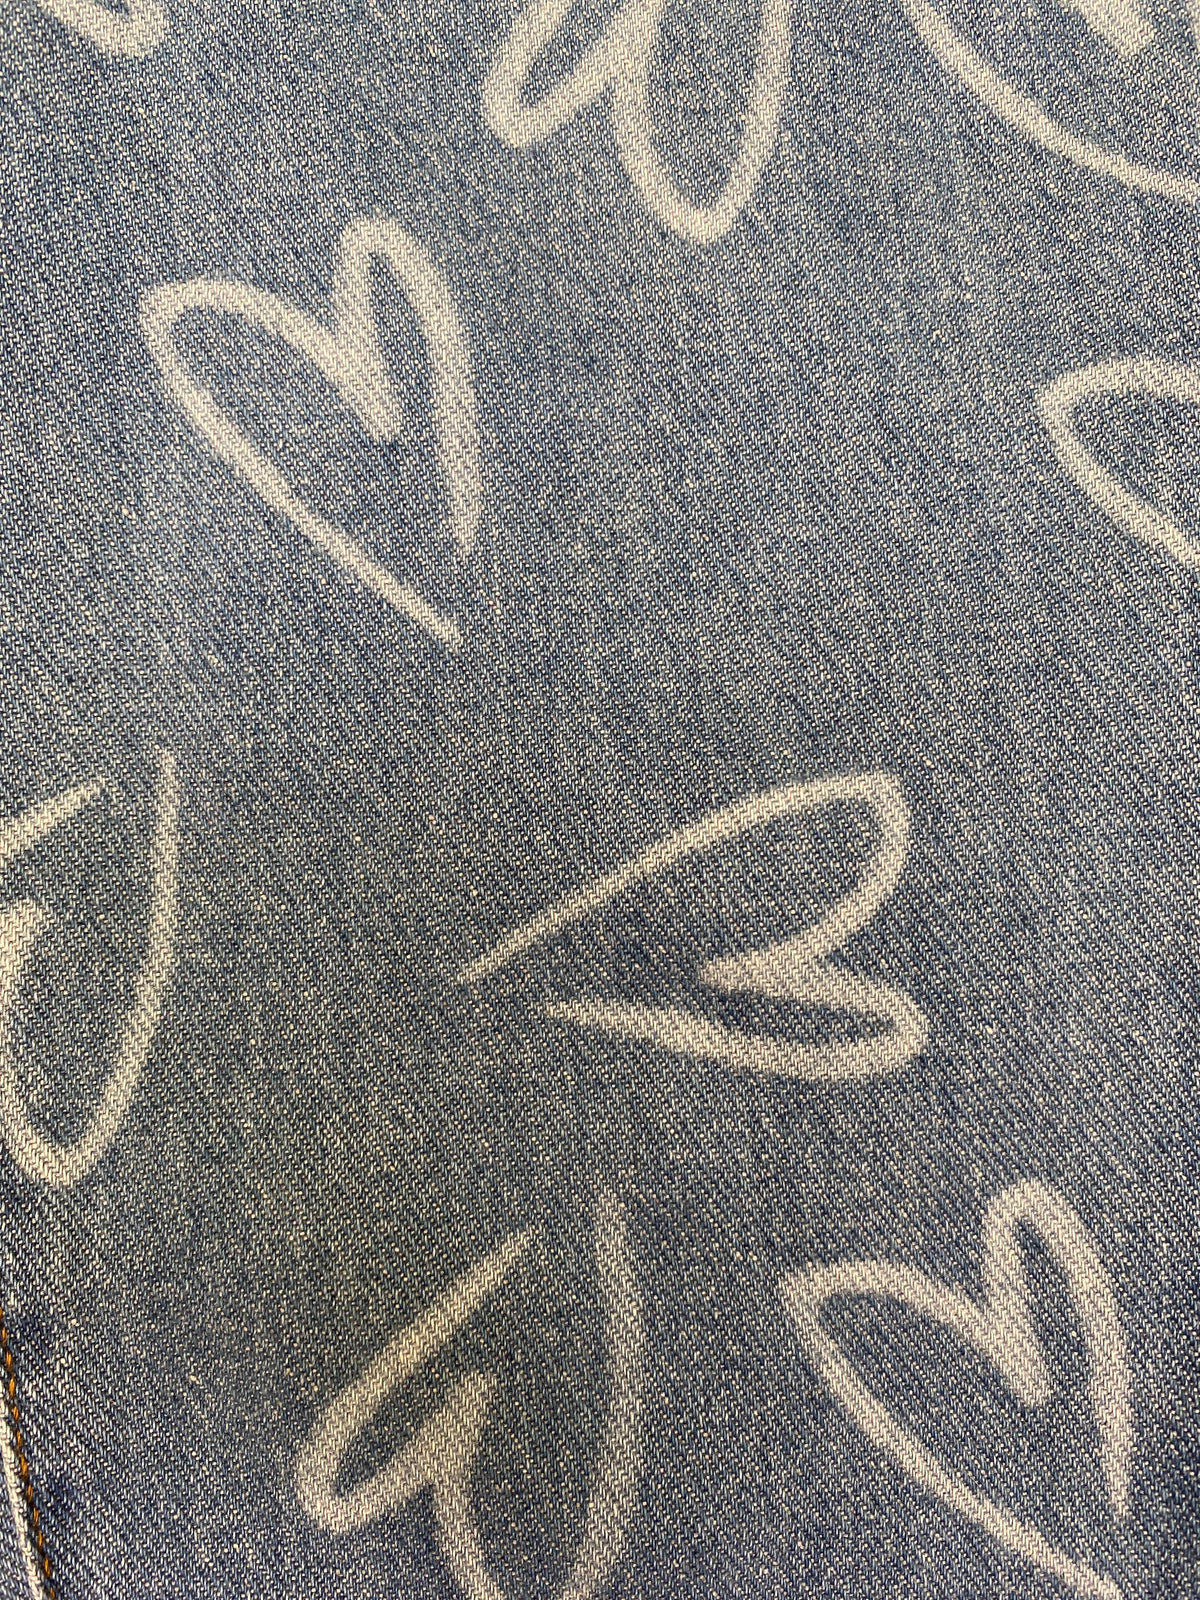 soft jeans heart